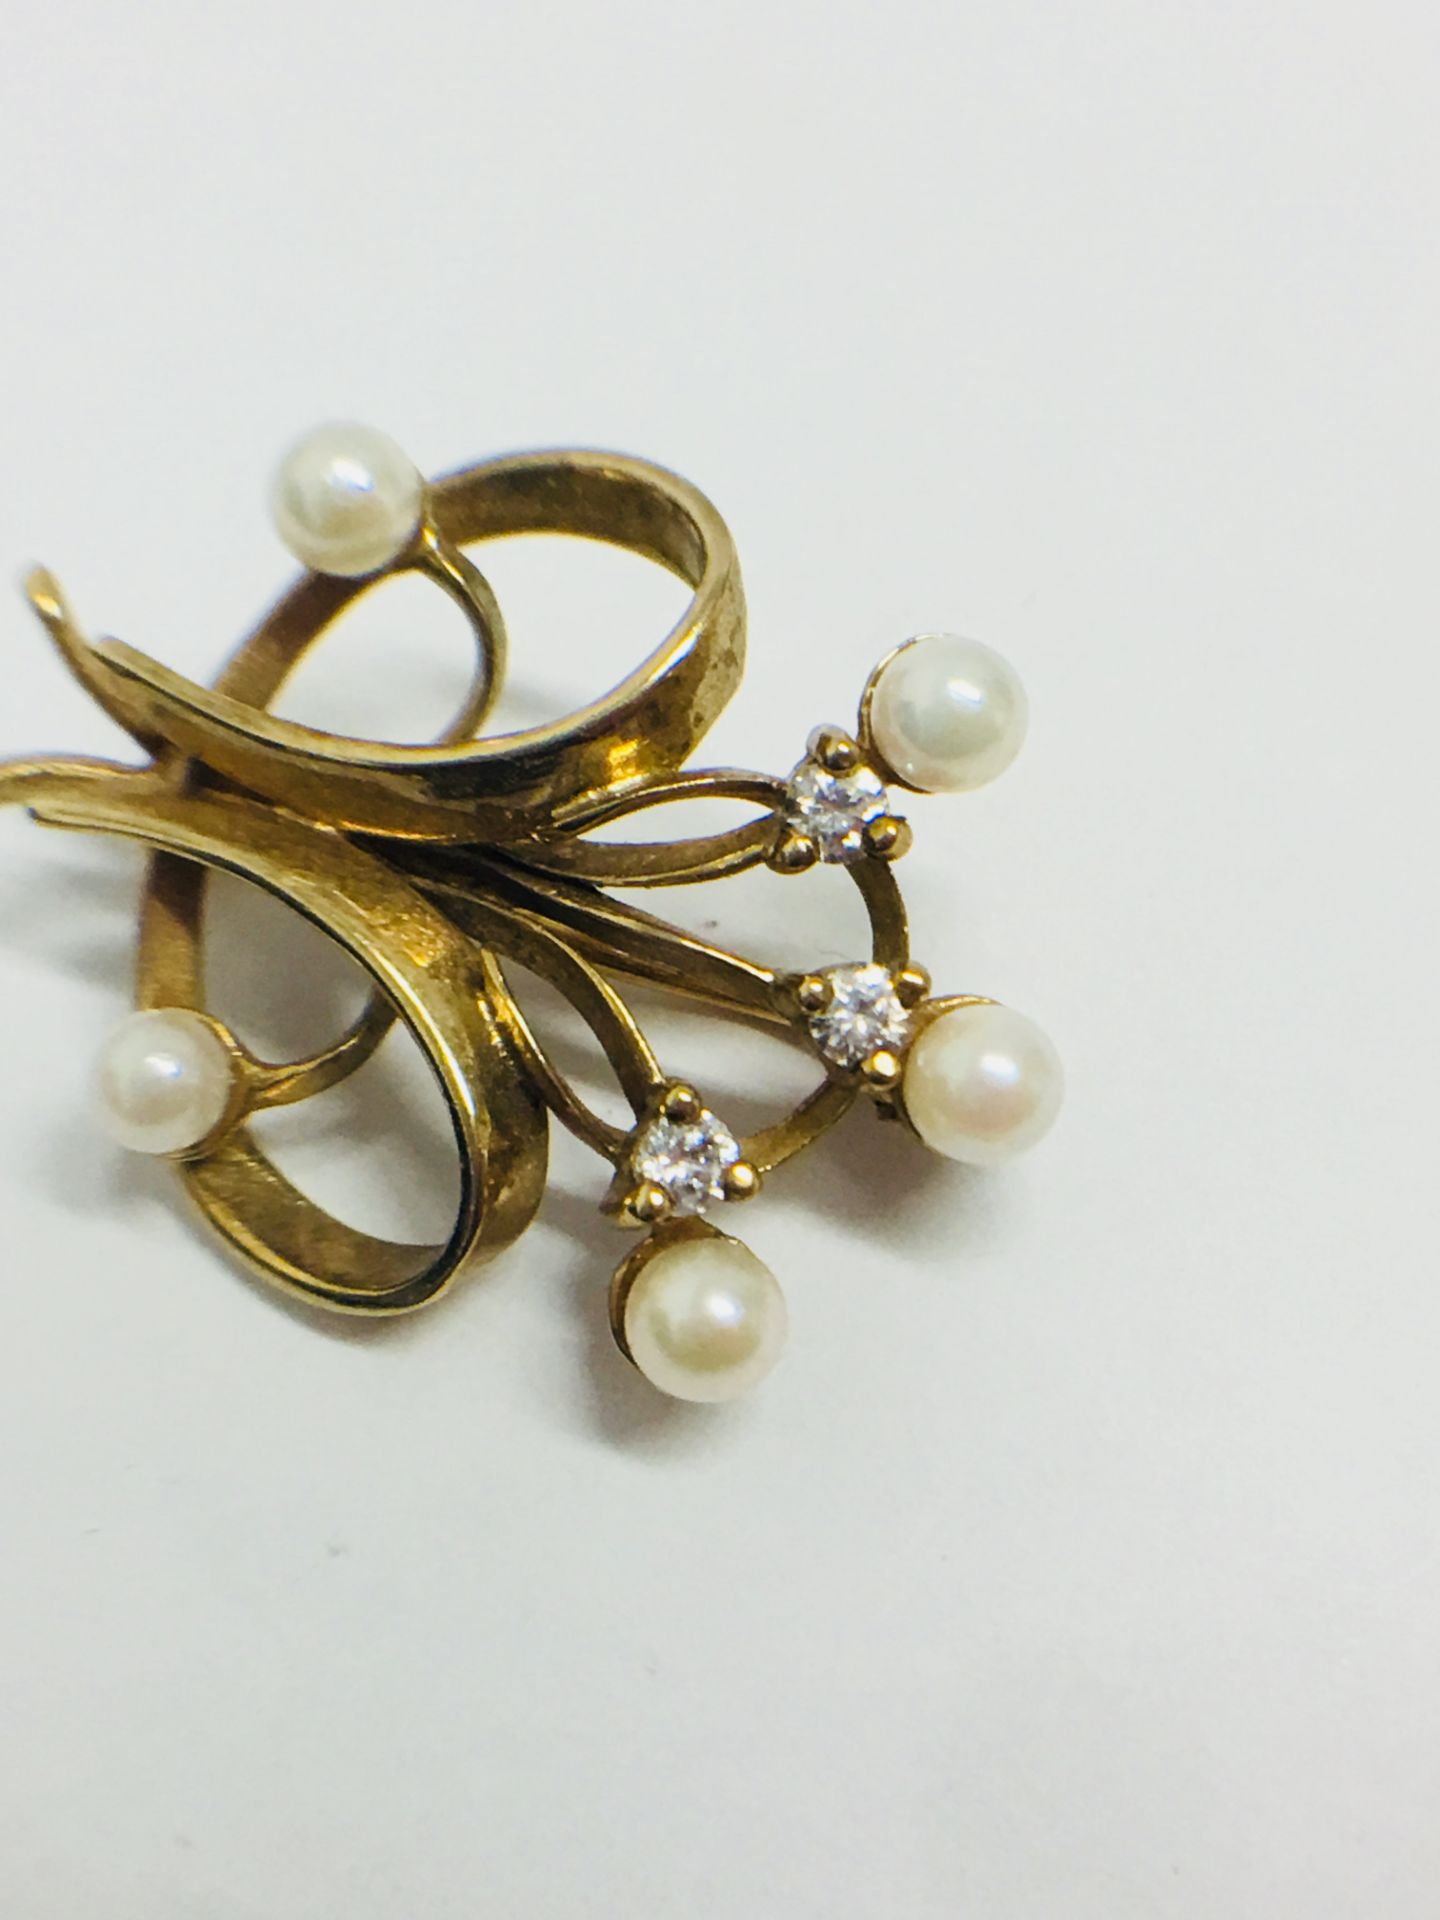 9K Yellow Gold Cultured Pearl and CZ broach - Image 6 of 6